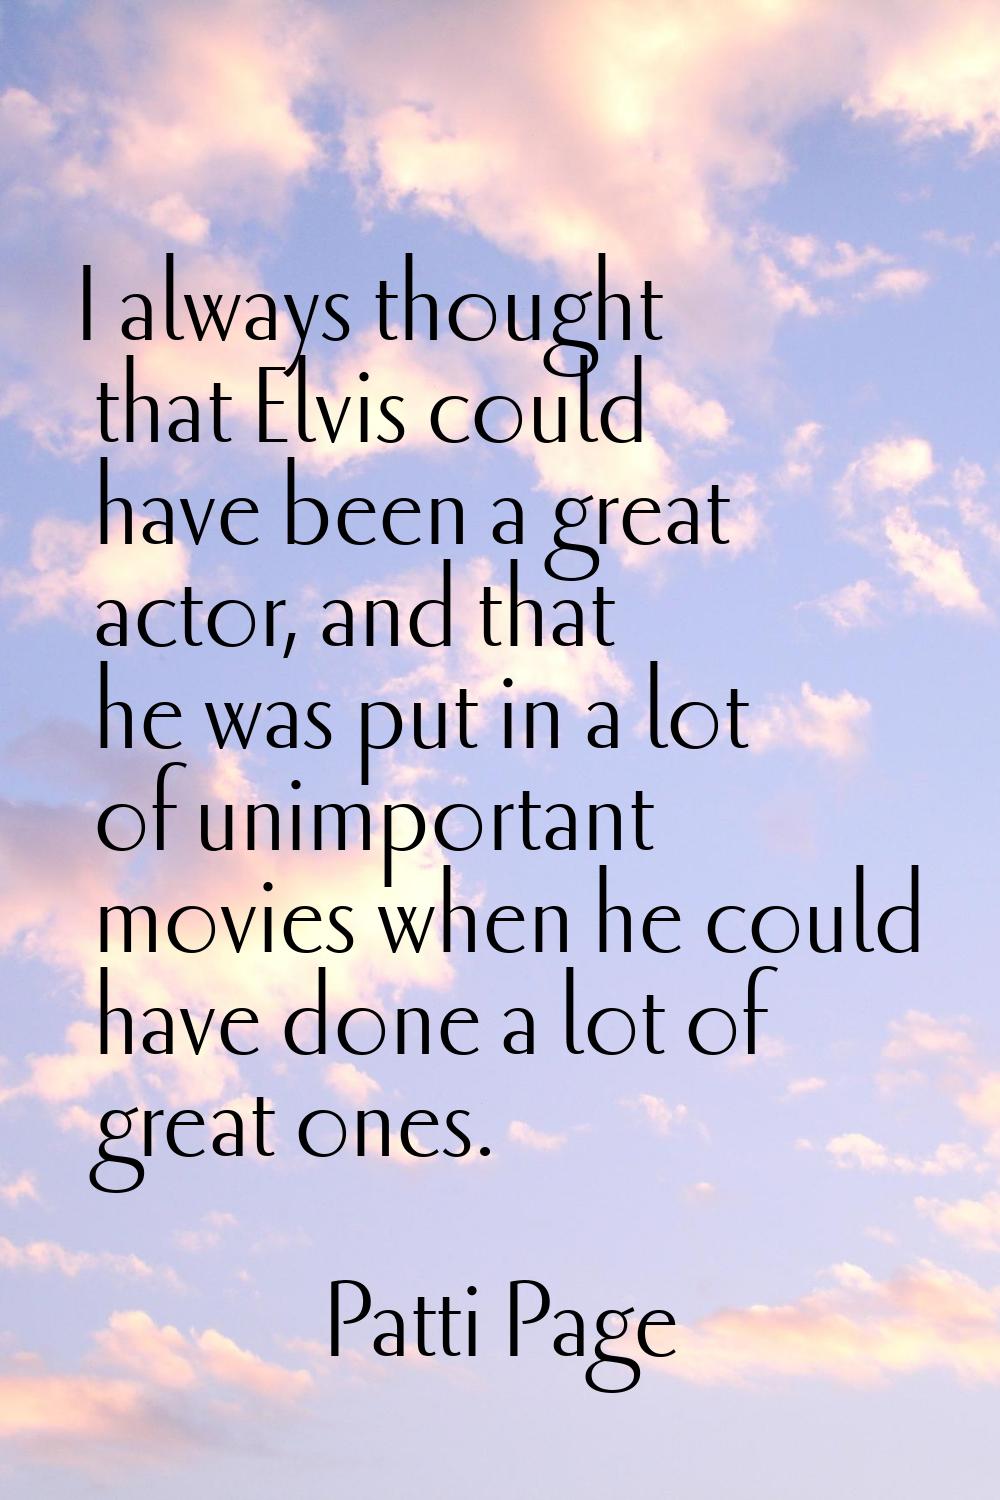 I always thought that Elvis could have been a great actor, and that he was put in a lot of unimport